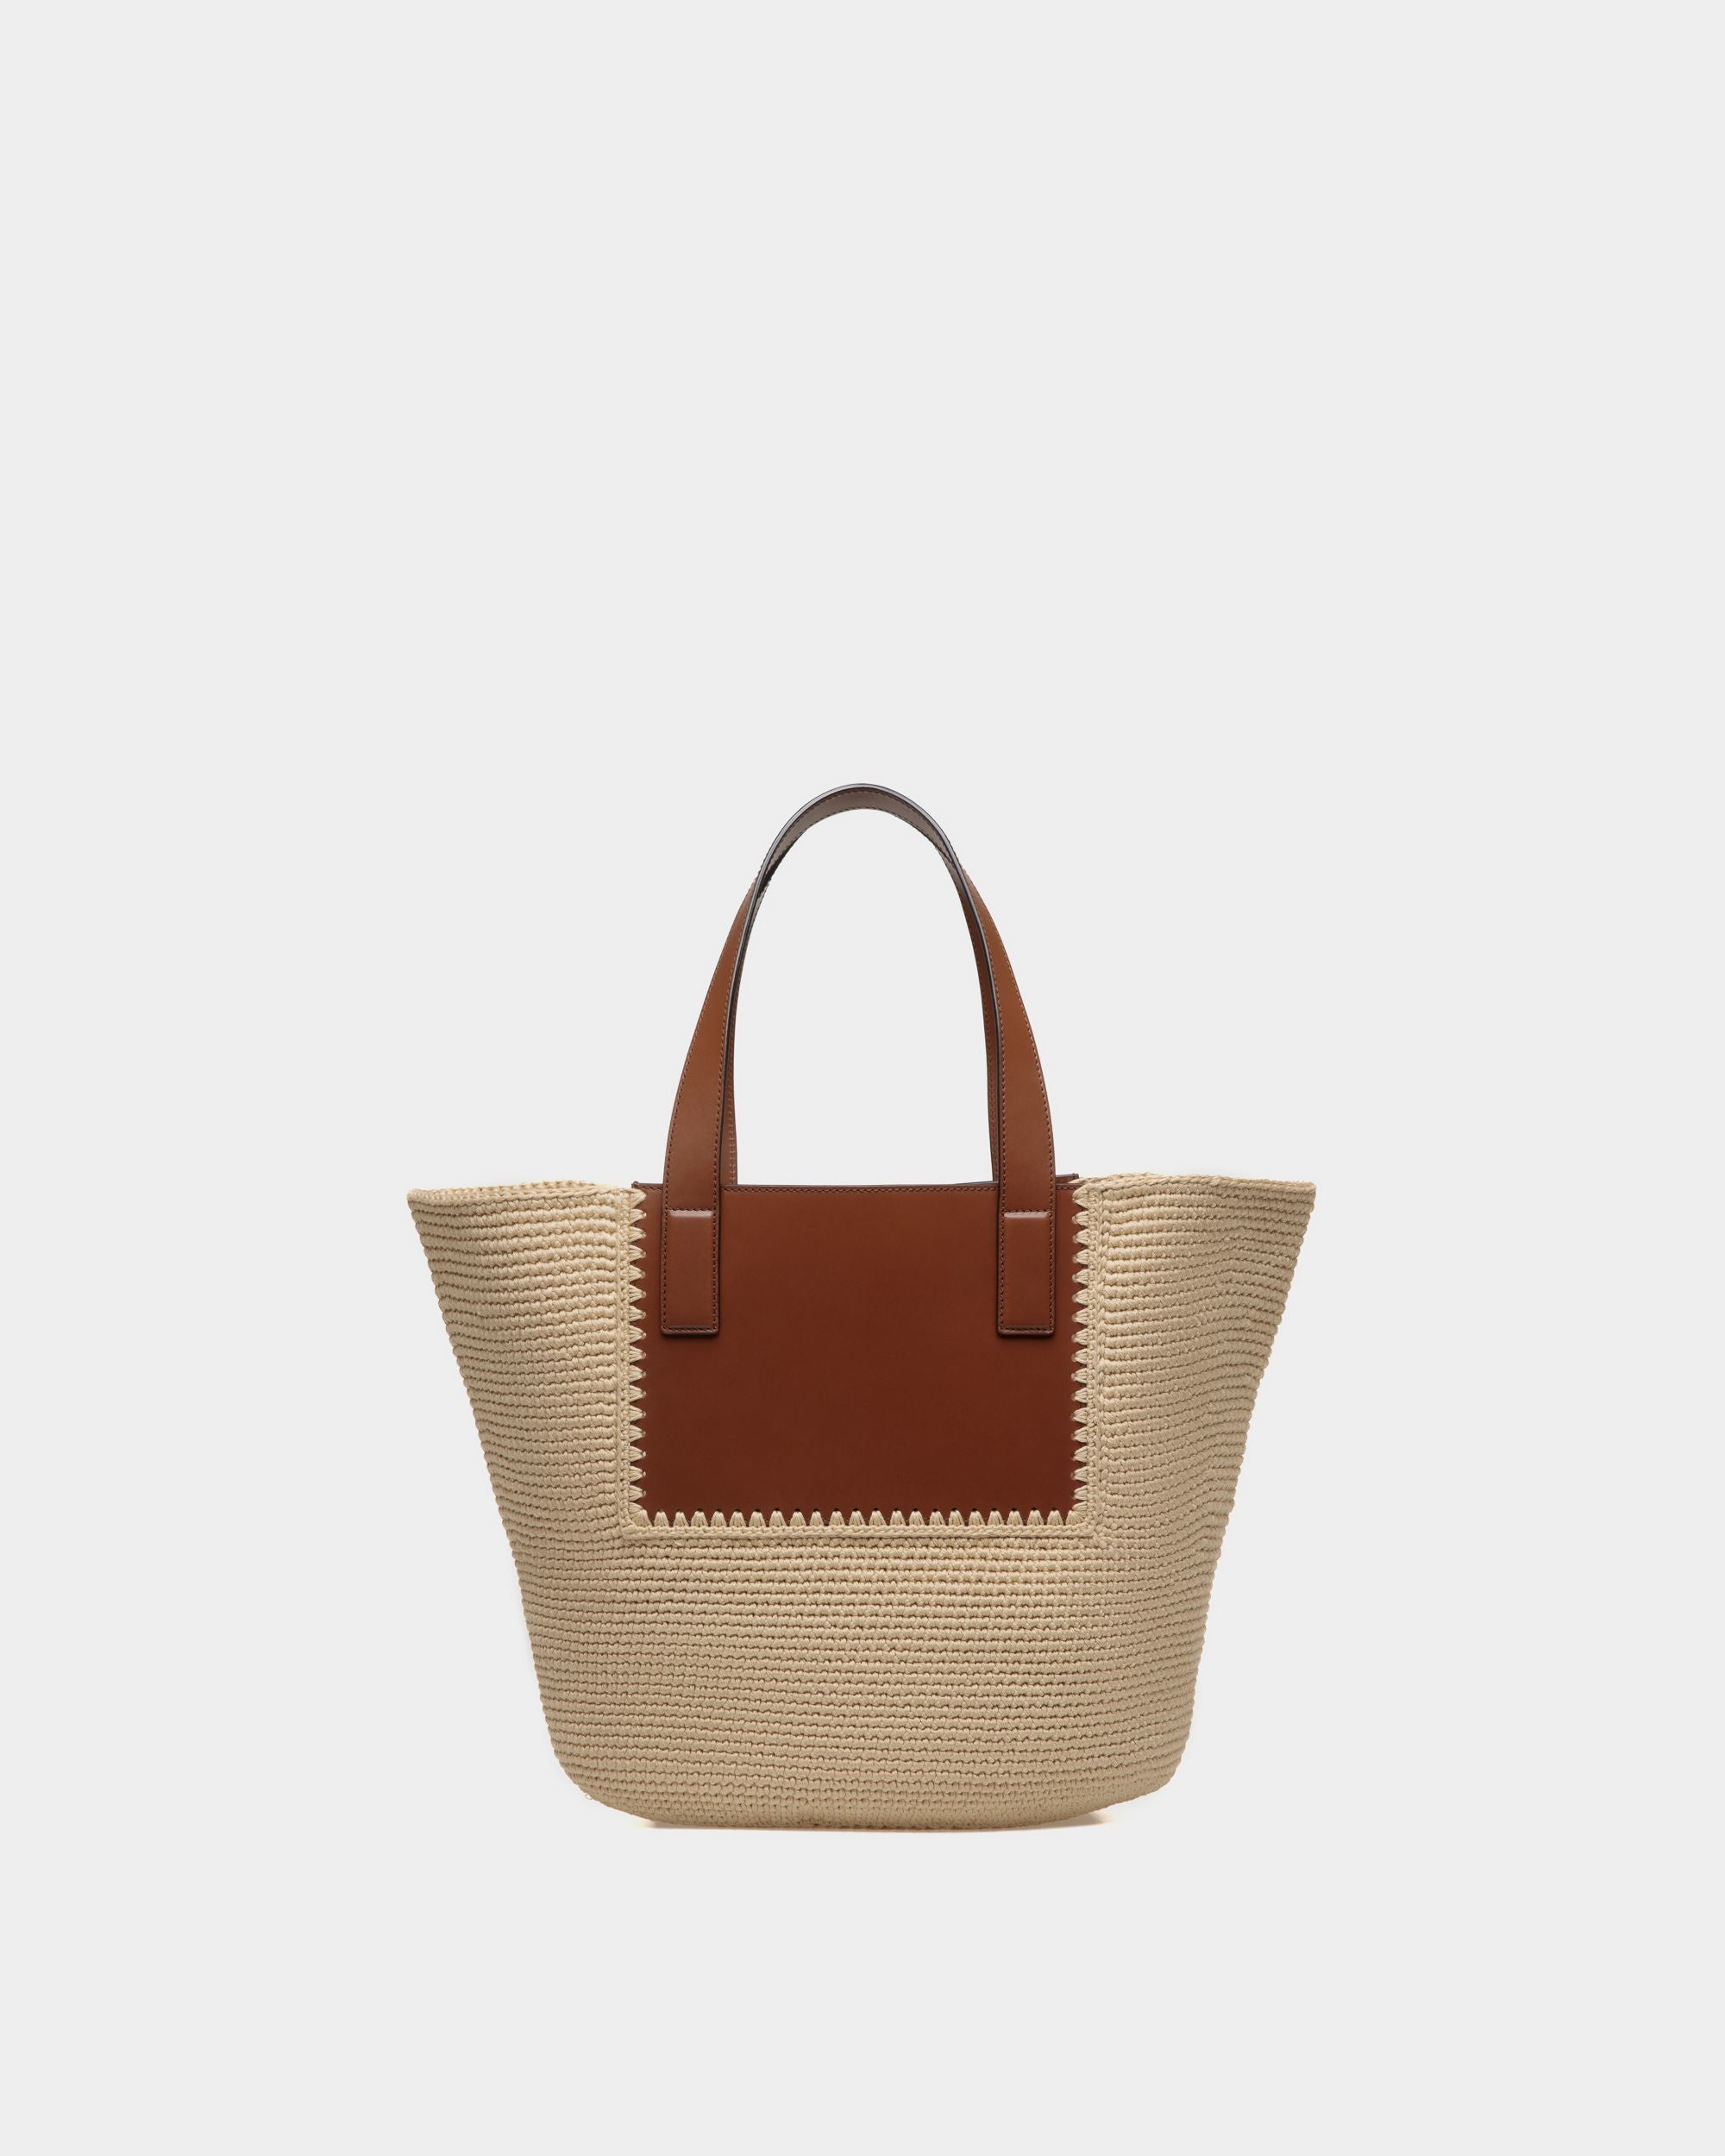 Lace | Women's Tote Bag in Neutral Cotton and Leather | Bally | Still Life Back